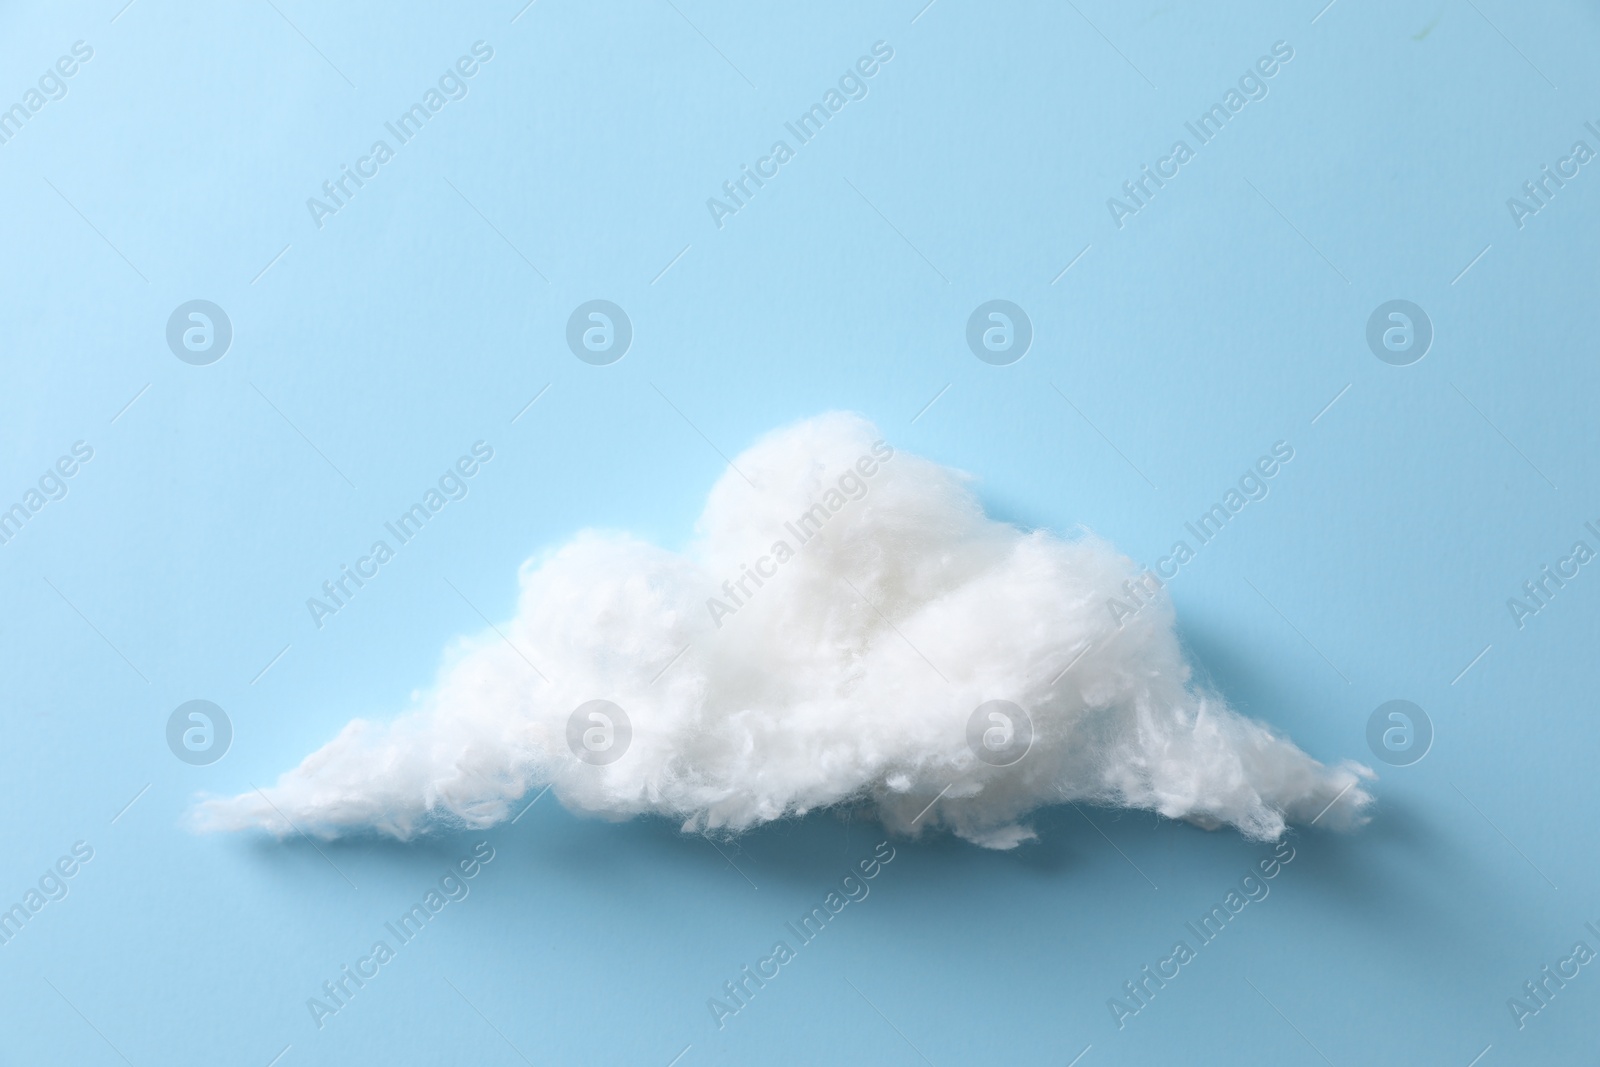 Photo of Cloud made of cotton on light blue background